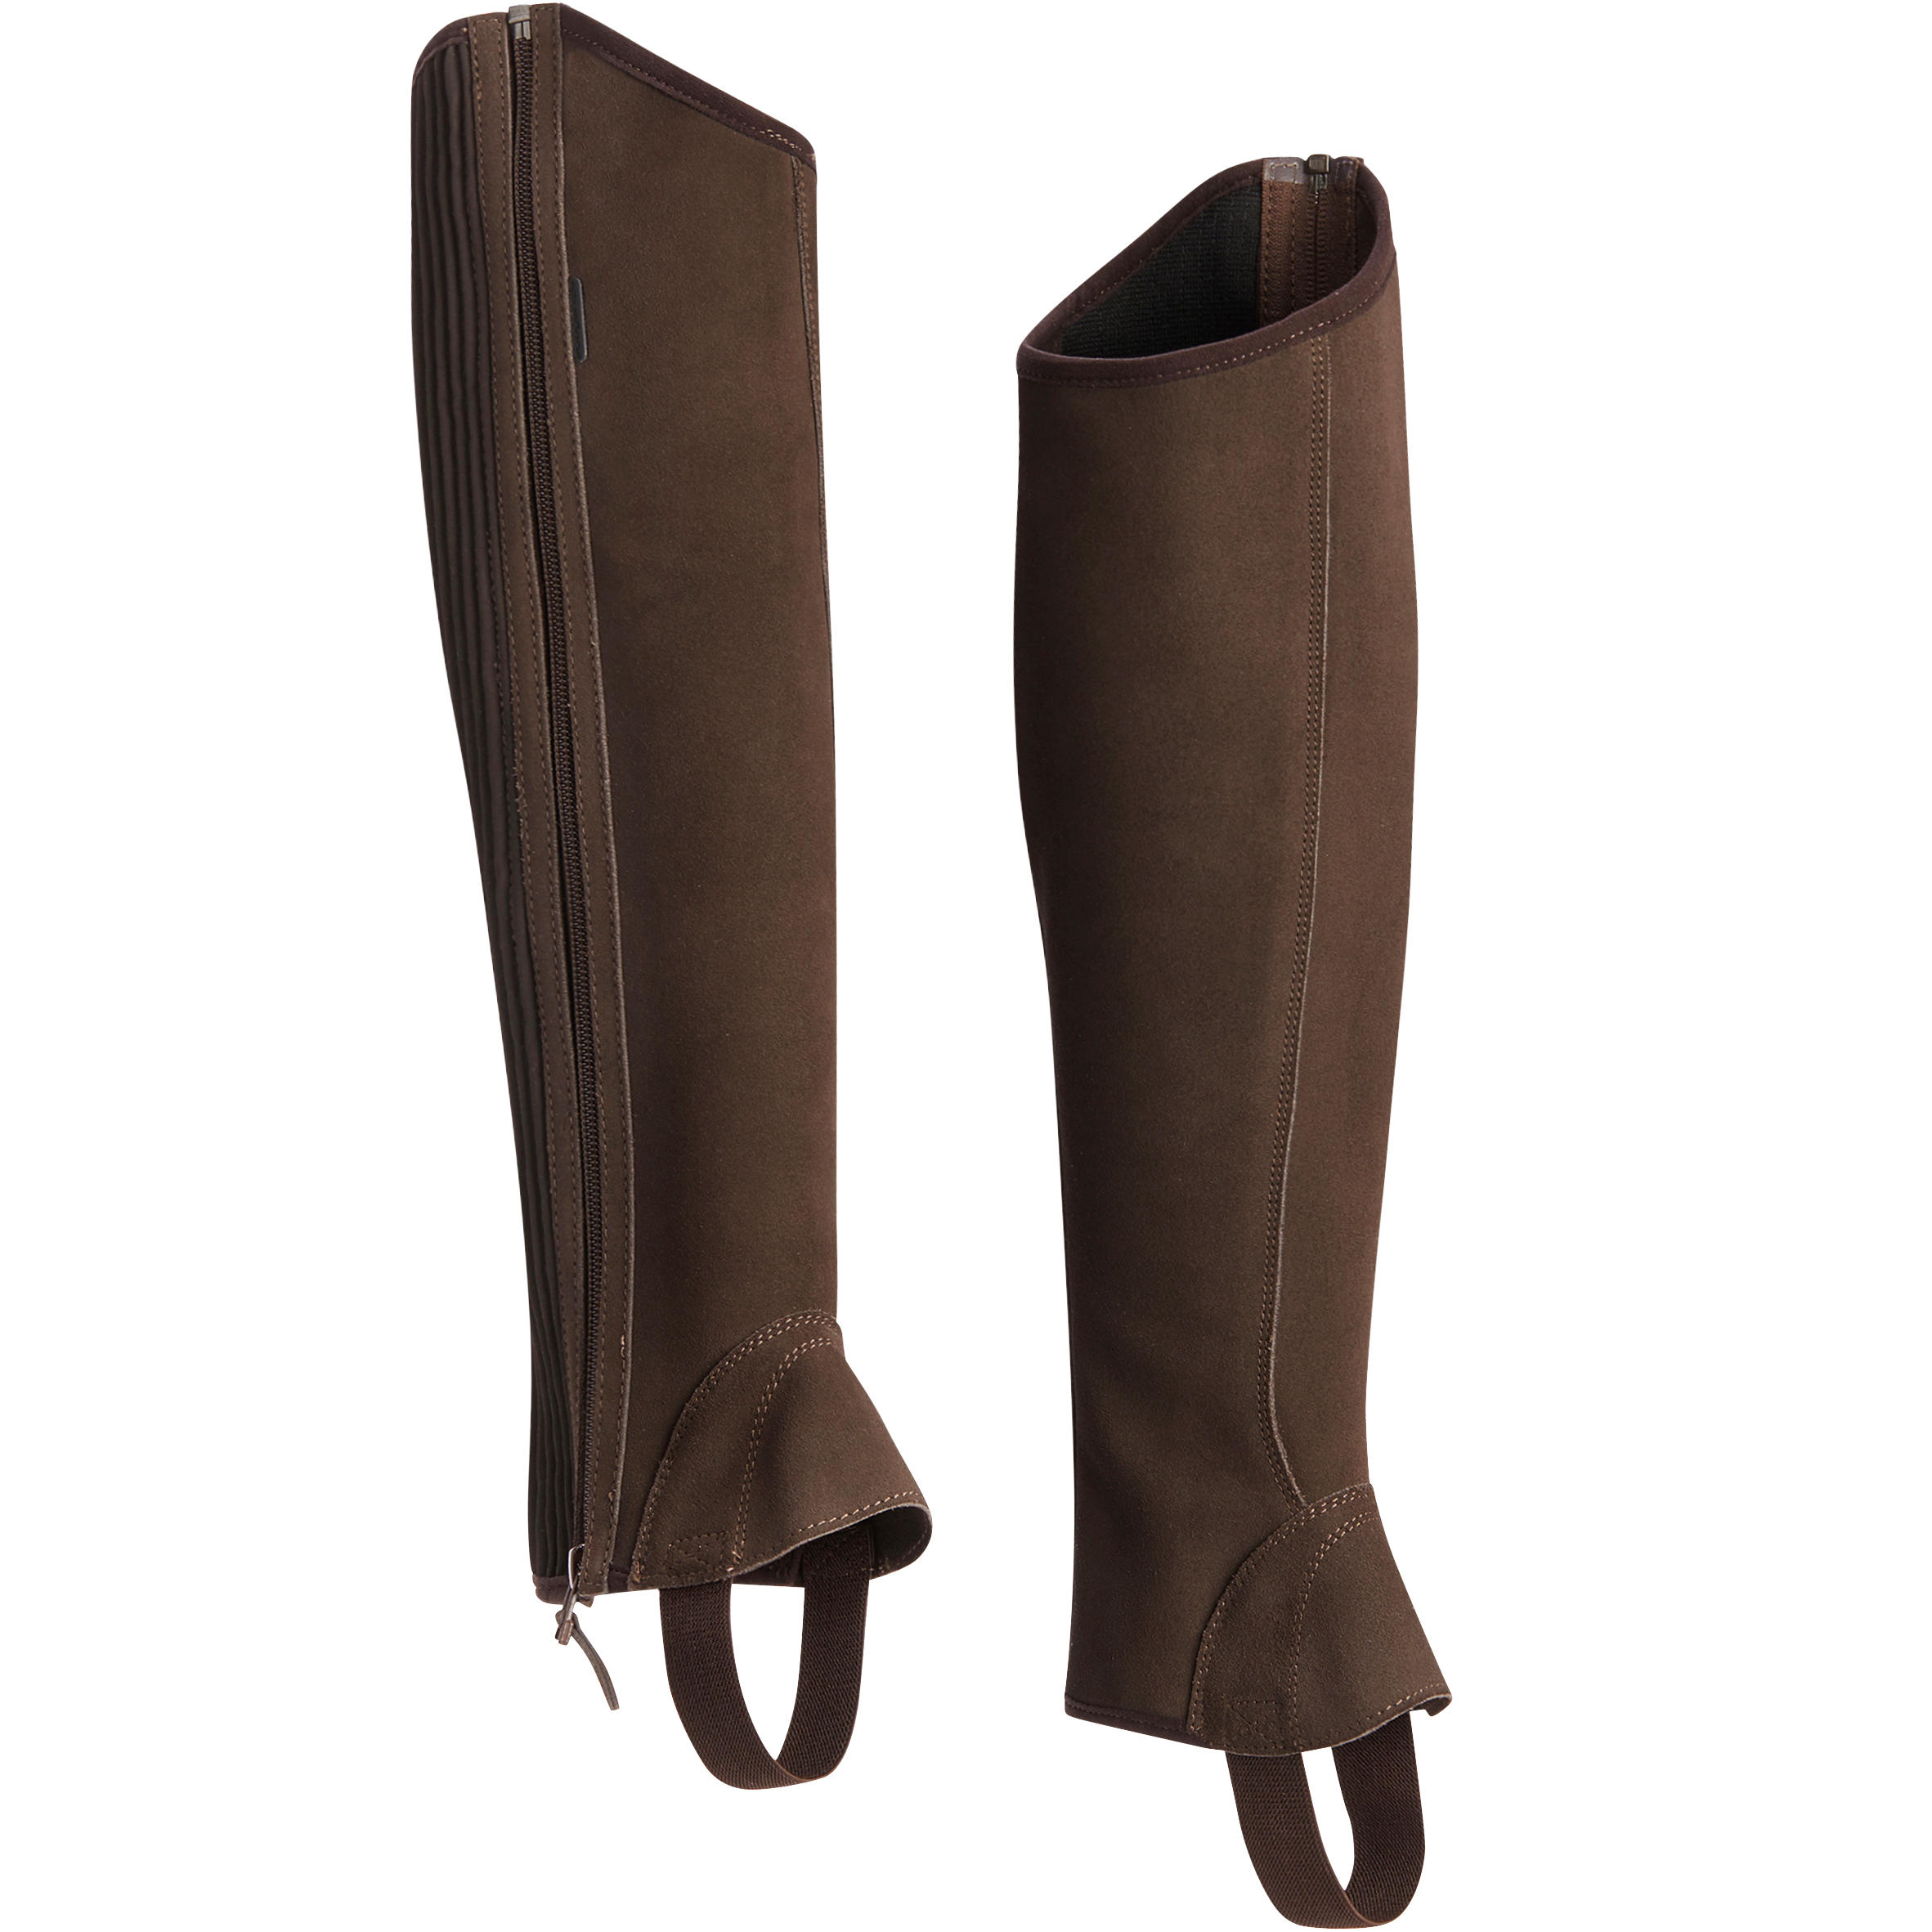 Sentier Adult Horse Riding Gusseted Half-Chaps - Brown 2/12